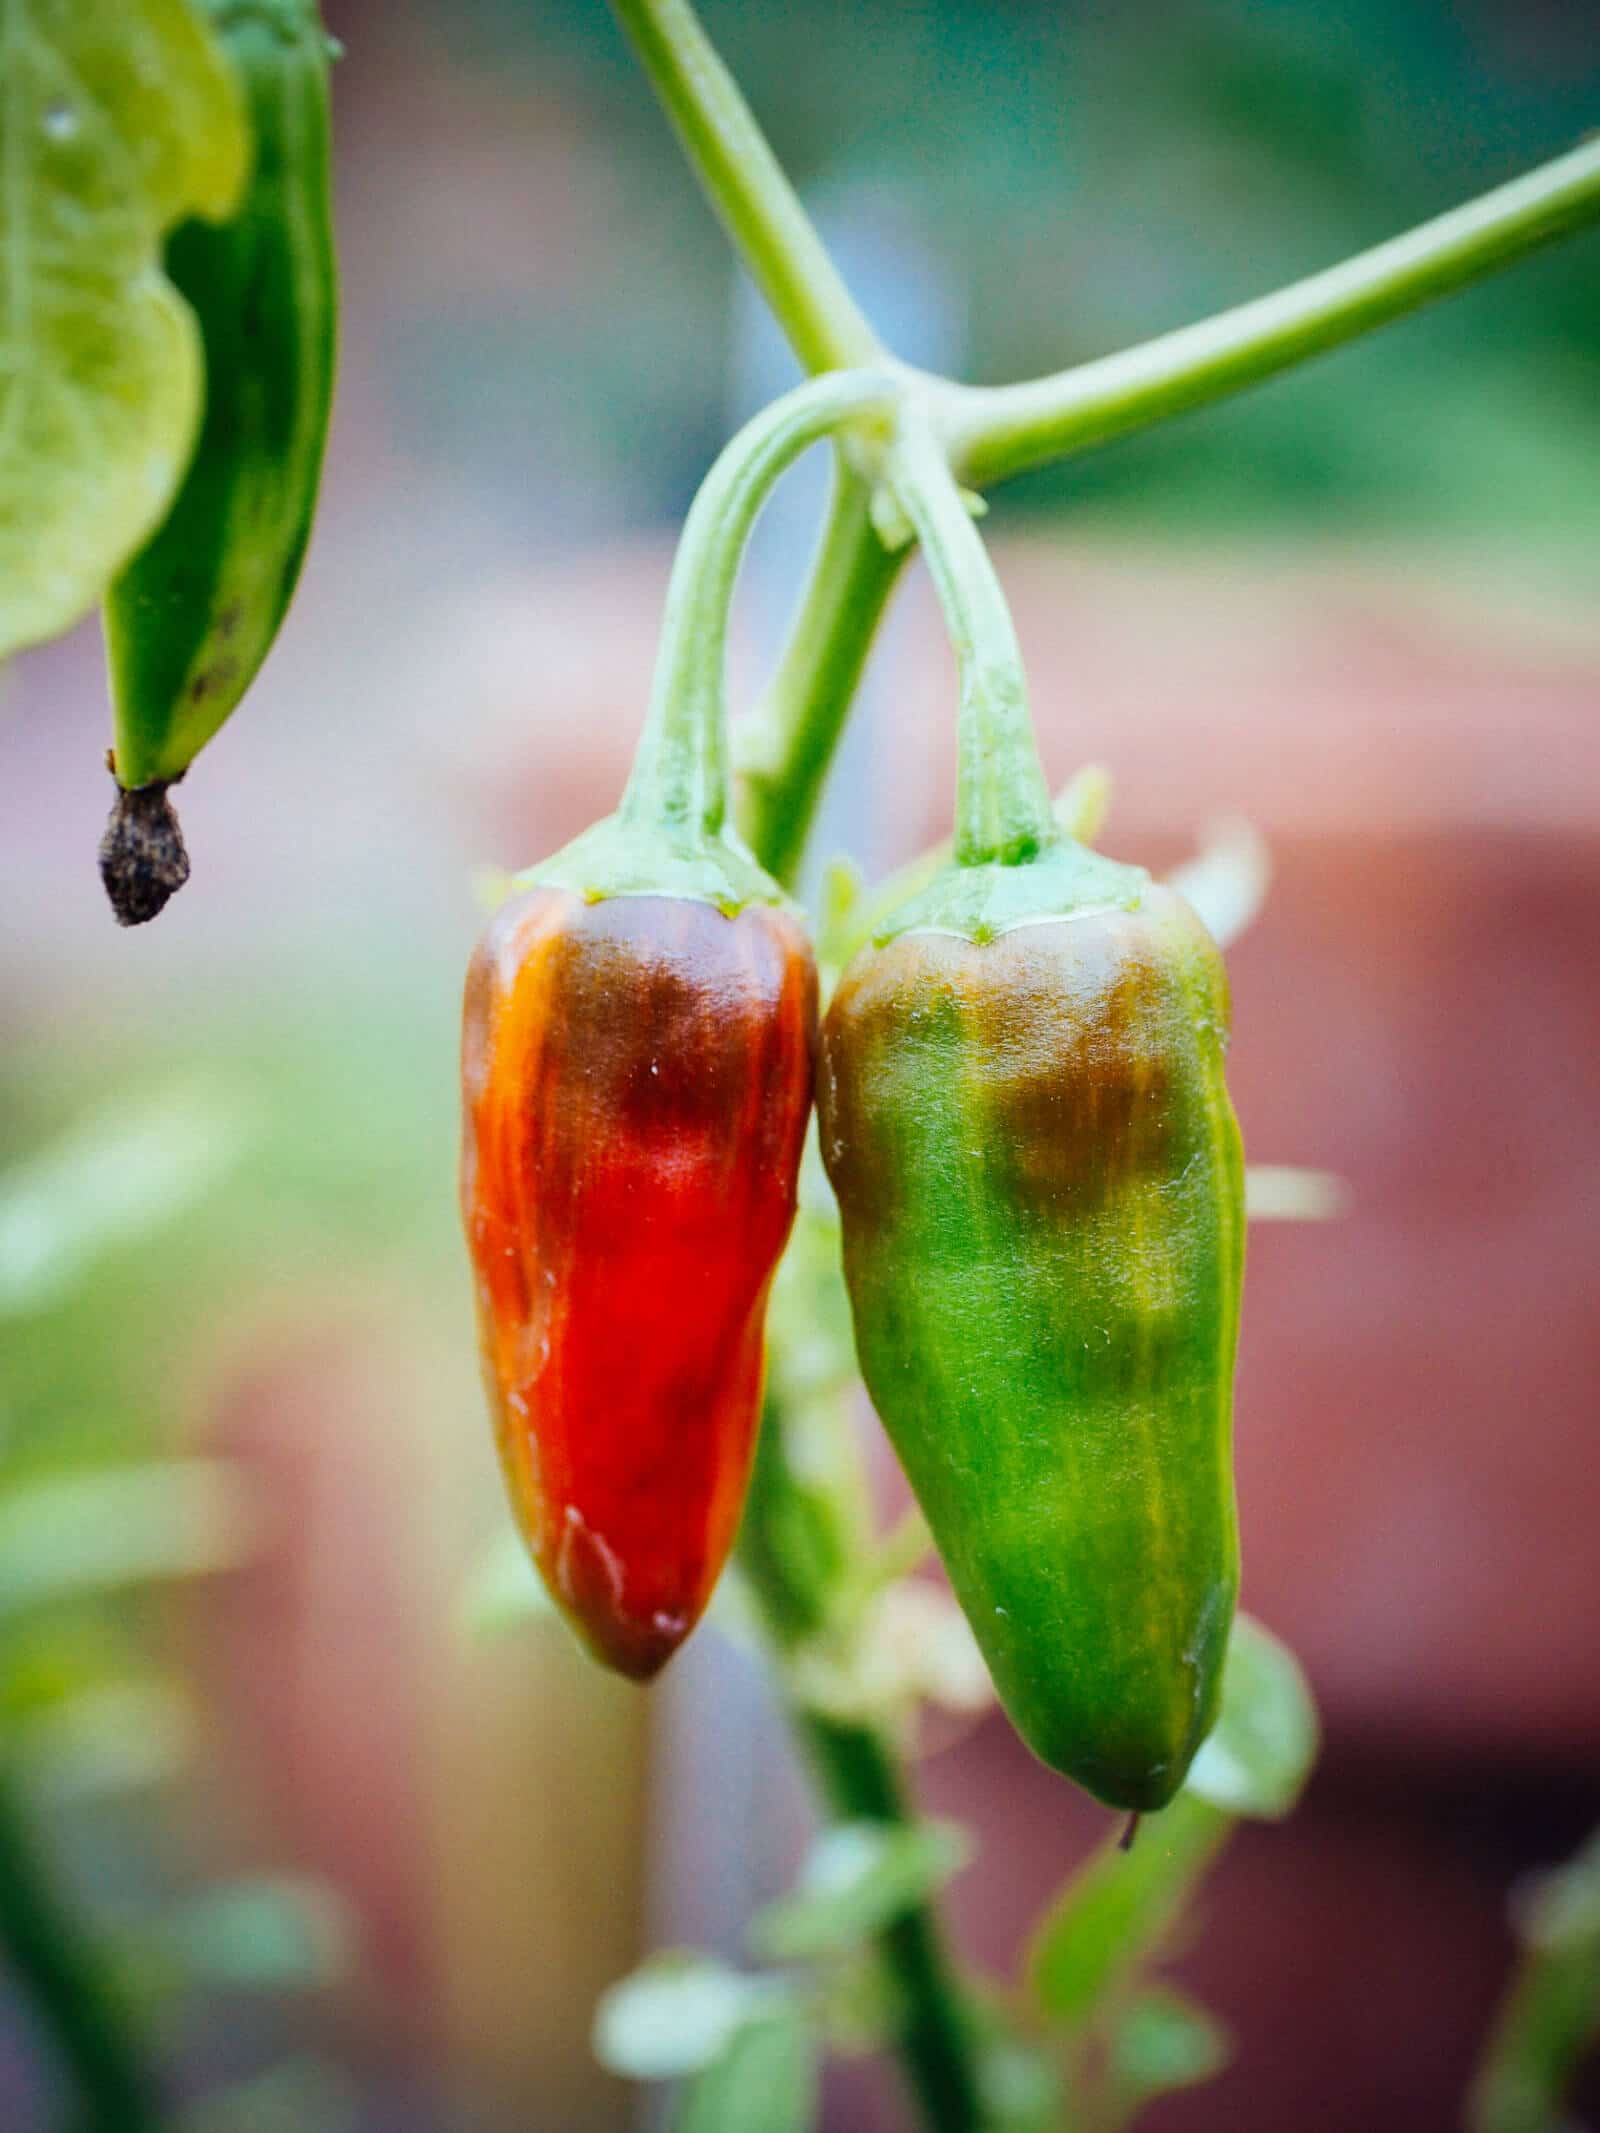 Mature fish peppers